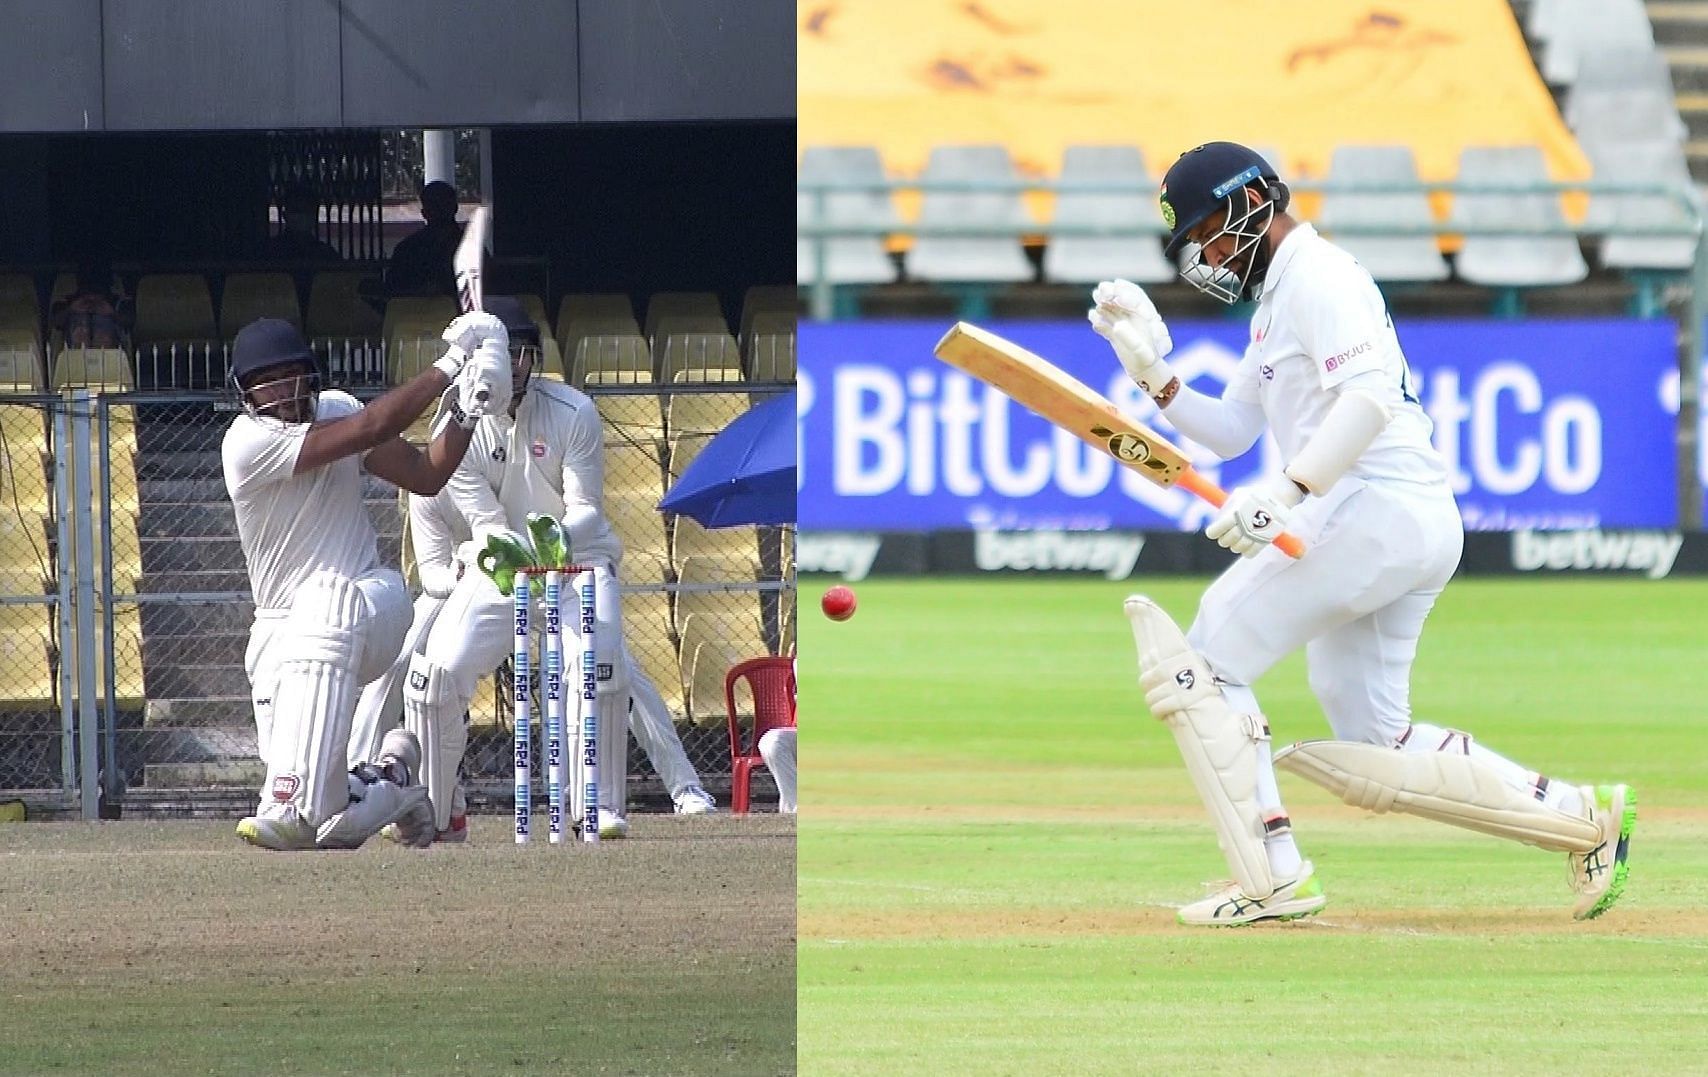 Shahrukh Khan and Cheteshwar Pujara experienced contrasting fortunes on Day 3 of the Ranji Trophy 2022.